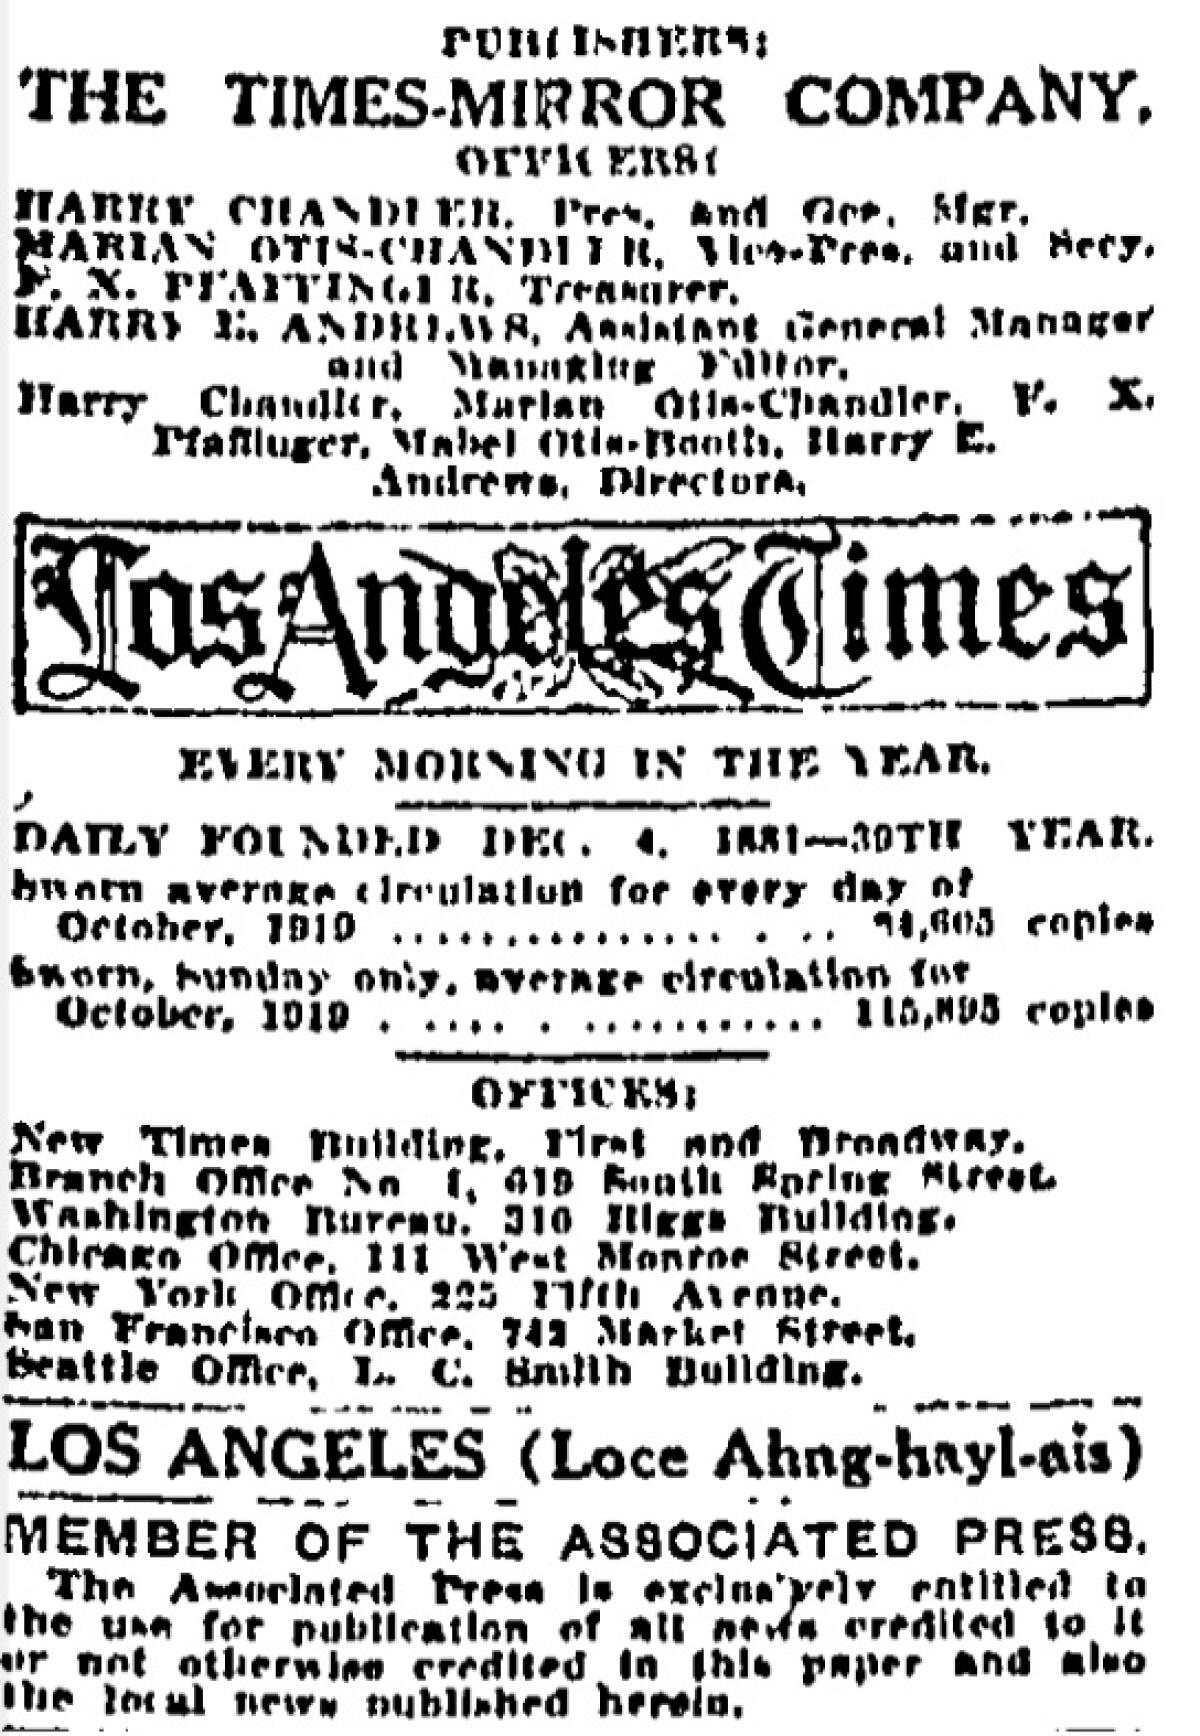 The relevant portion of the text reads: "LOS ANGELES (Loce Ahng-hayl-ais)